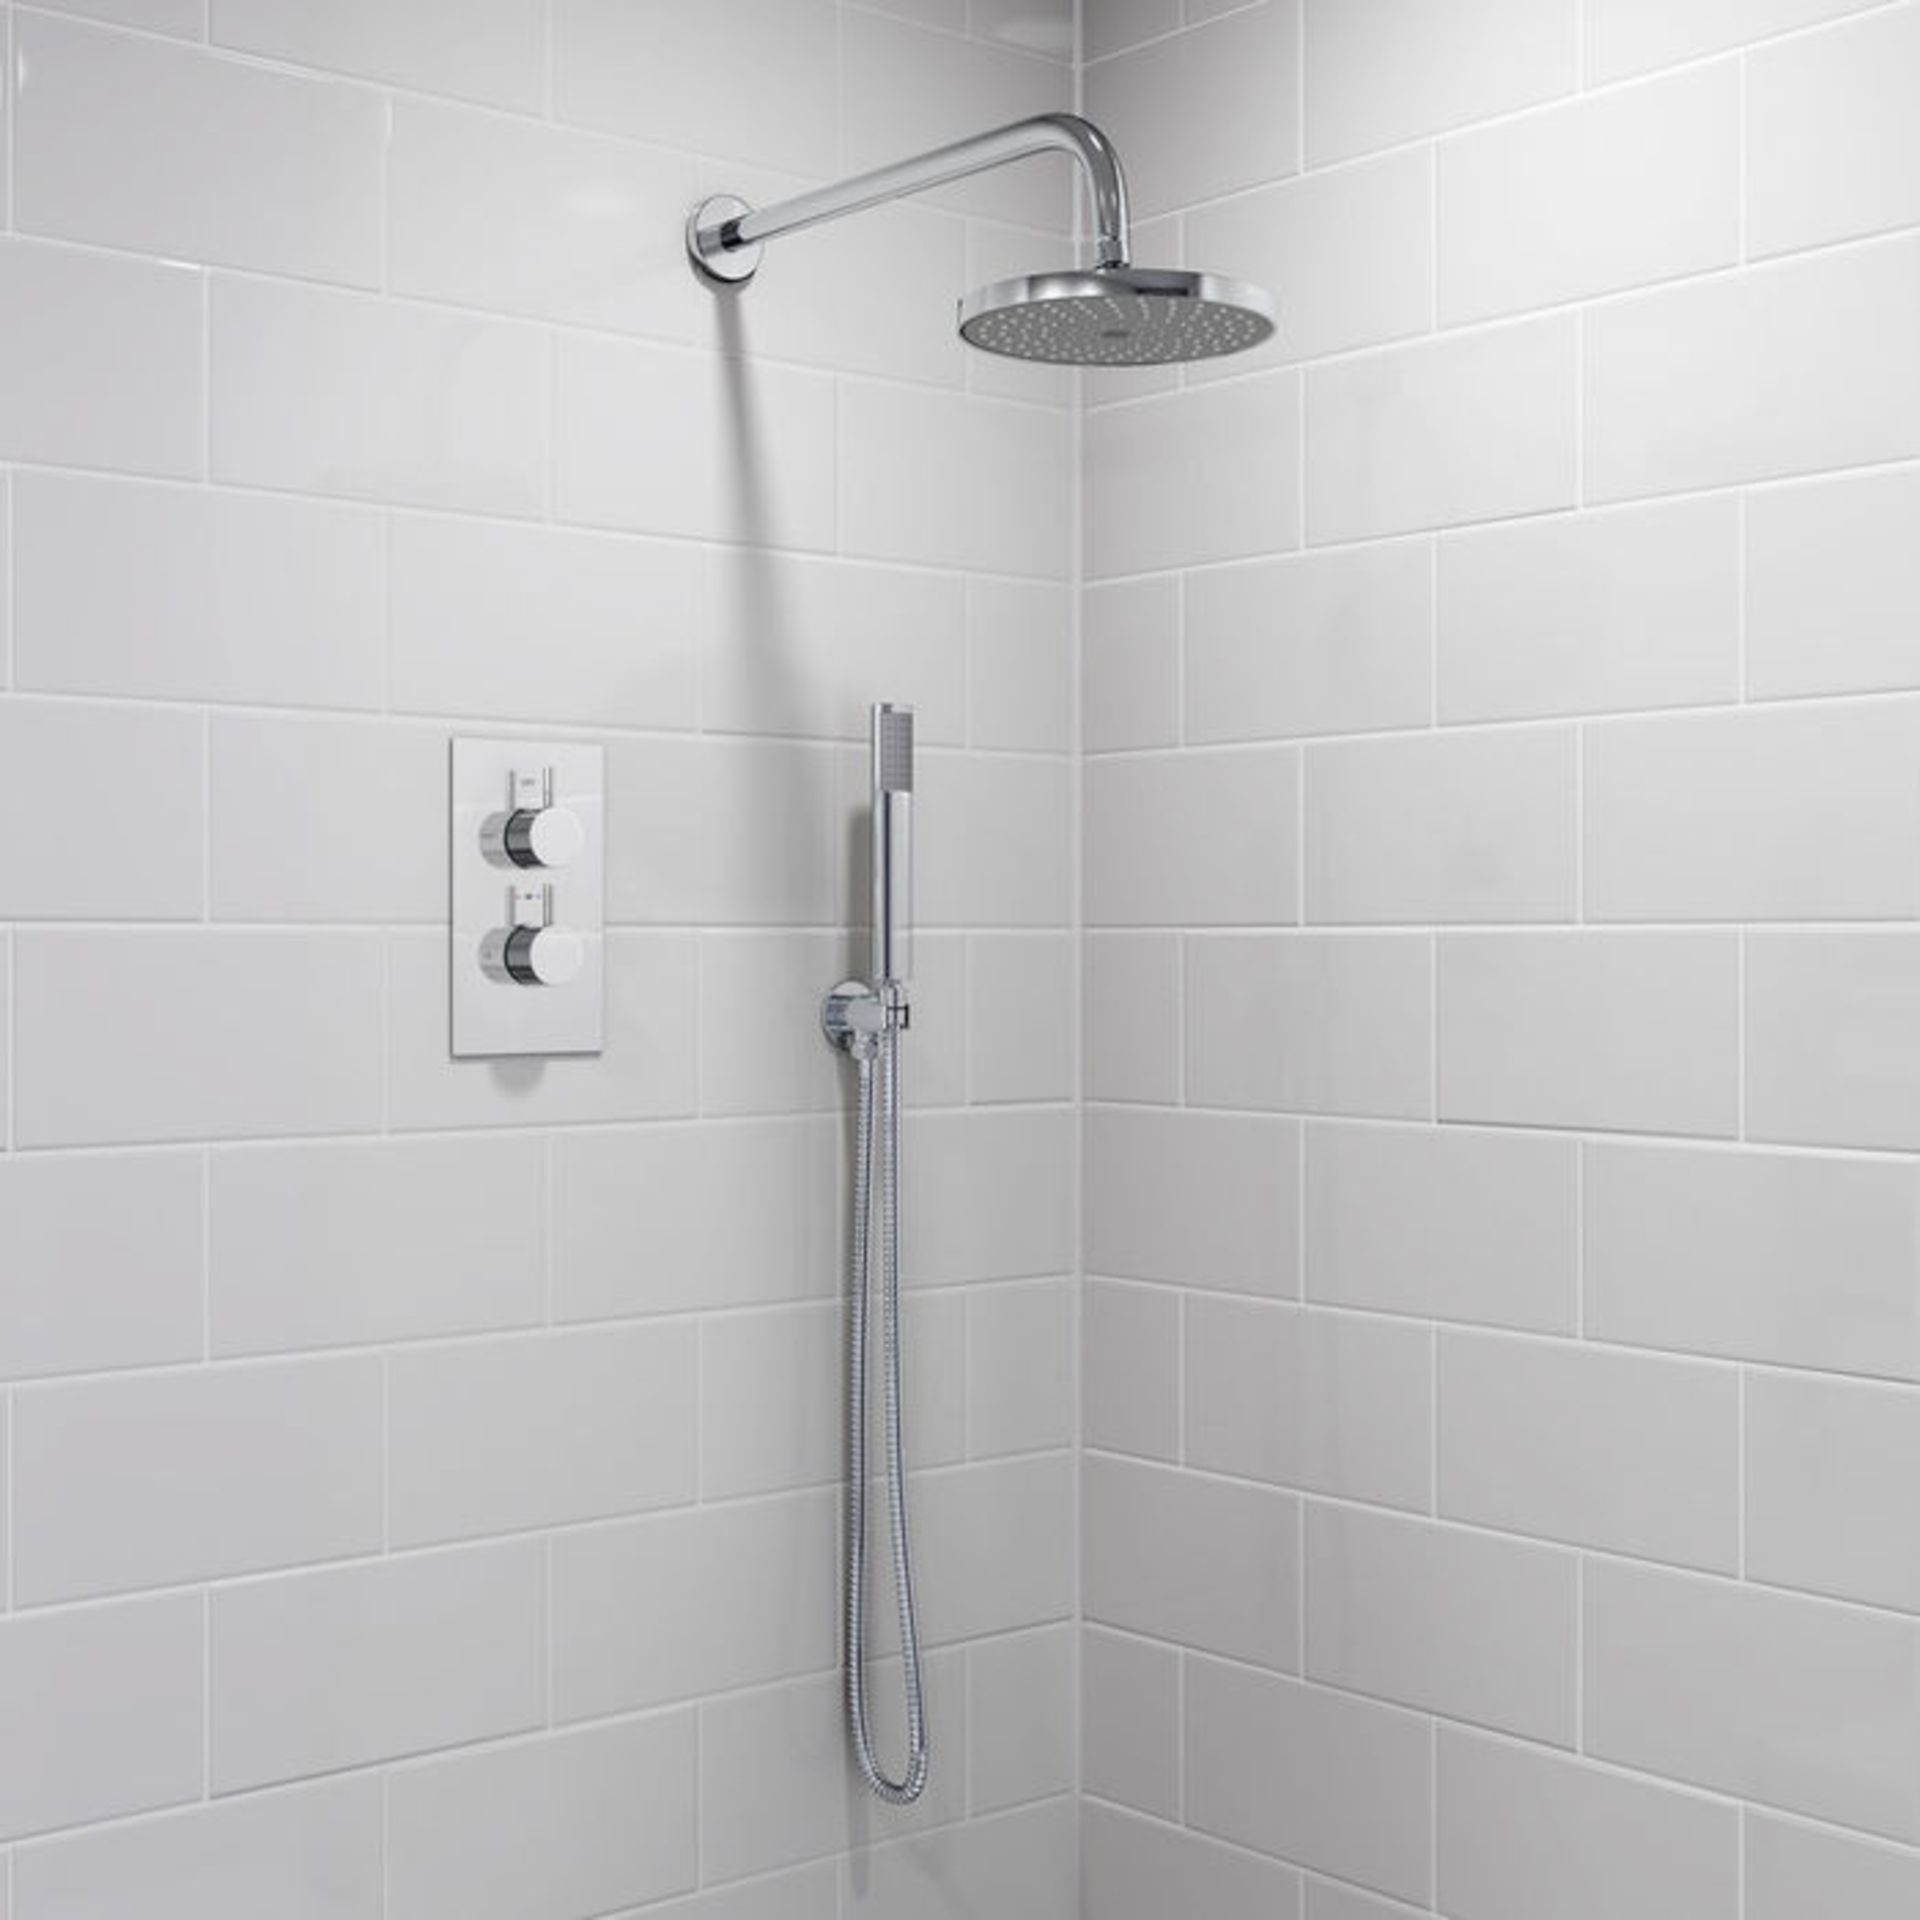 (H38) Round Concealed Thermostatic Mixer Shower Kit & Medium Head. Family friendly detachable hand - Image 4 of 6